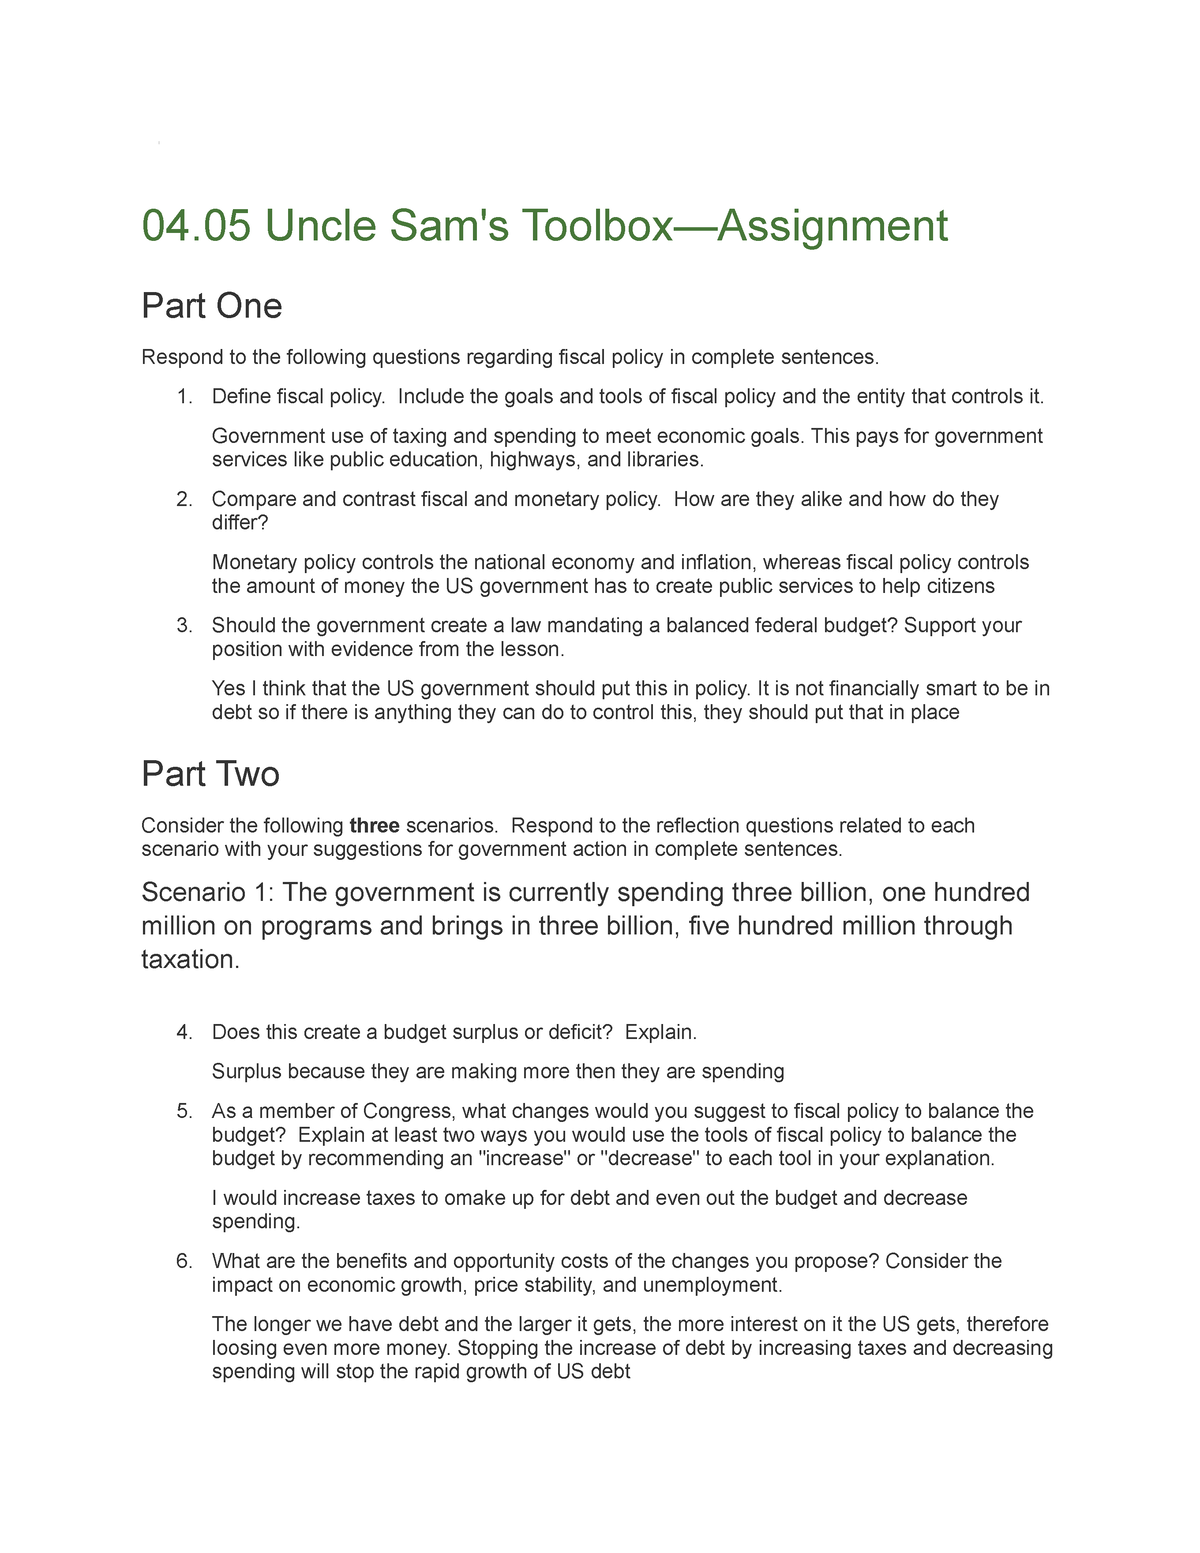 uncle sam's toolbox assignment answers